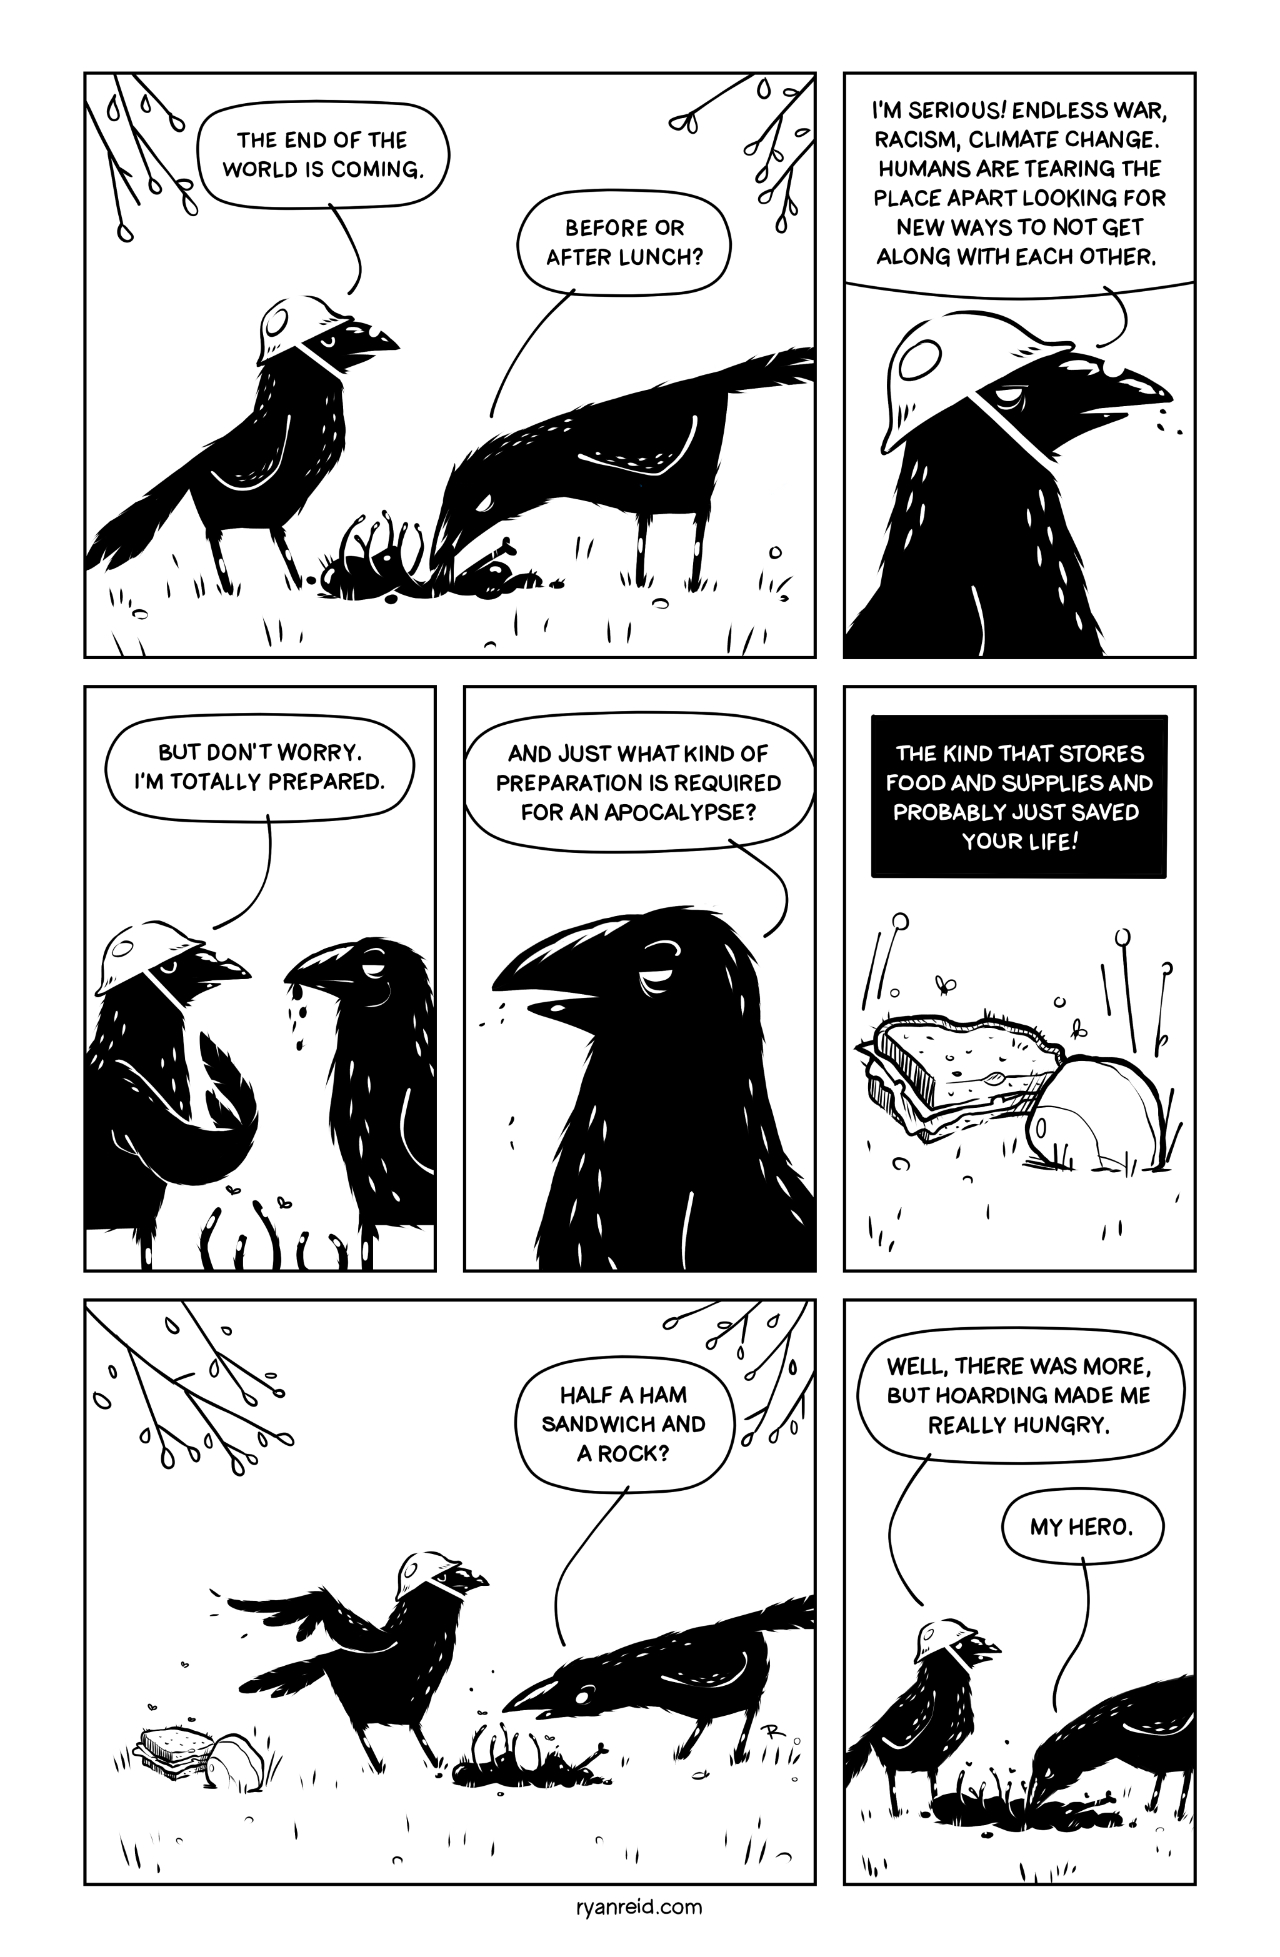 In this comic, the crows prepare for the apparently imminent end of the world.